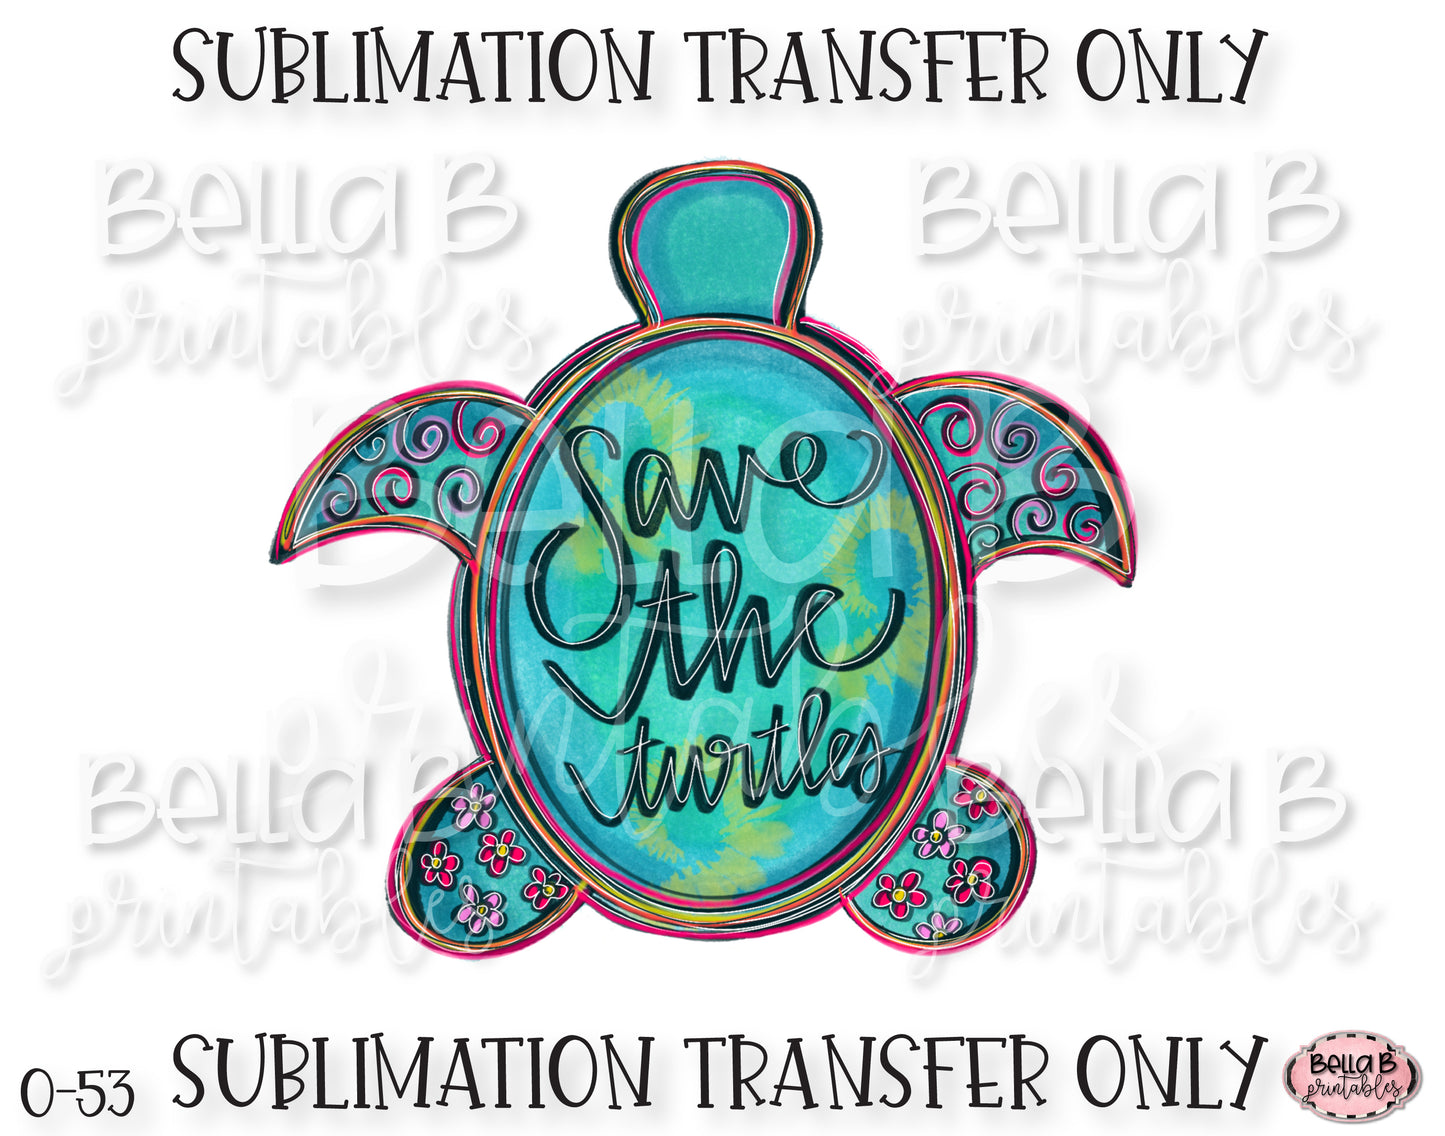 Save The Turtles Sublimation Transfer, Ready To Press, Heat Press Transfer, Sublimation Print